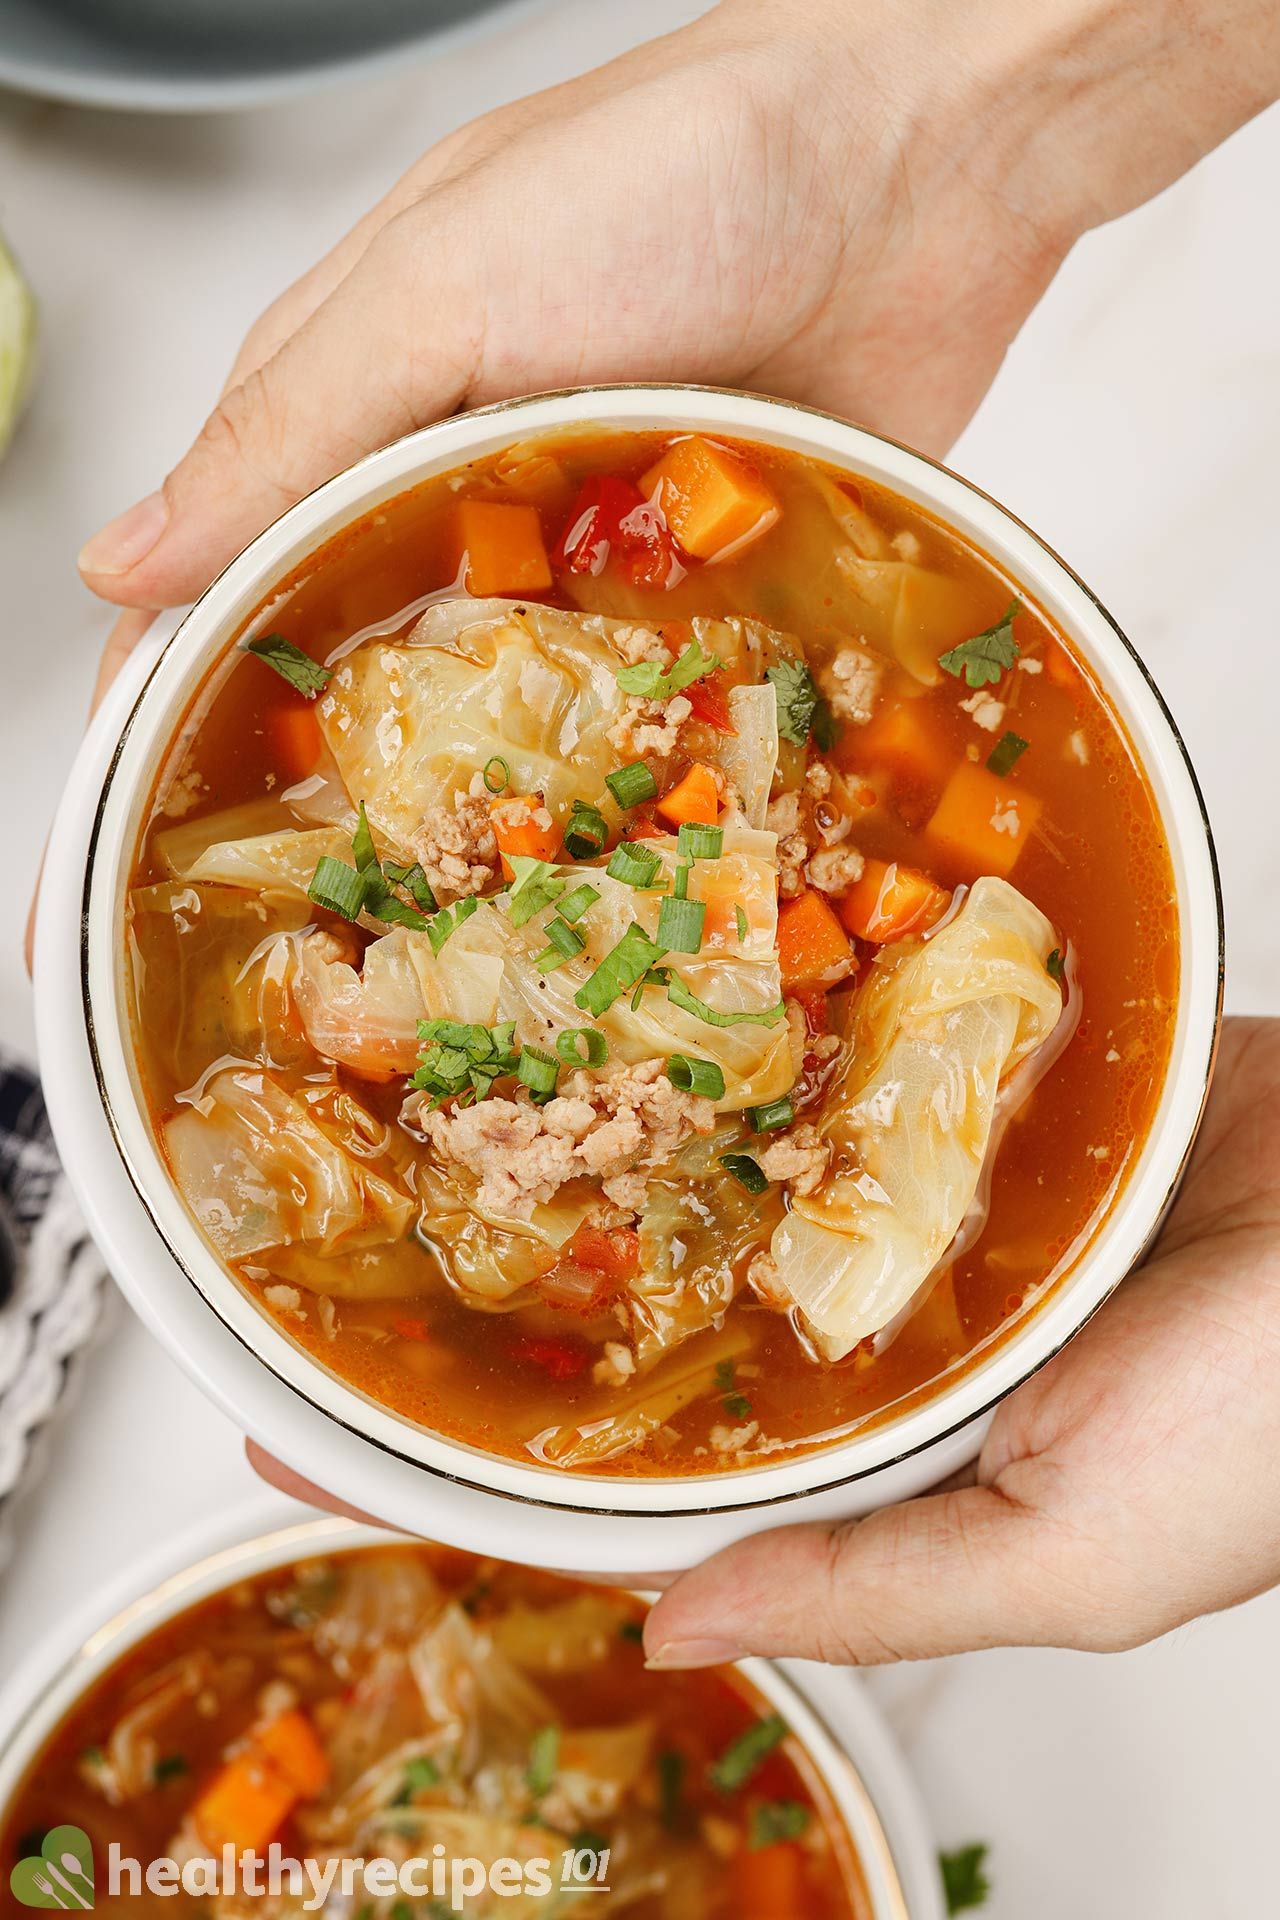 Homemade Cabbage Soup Recipe